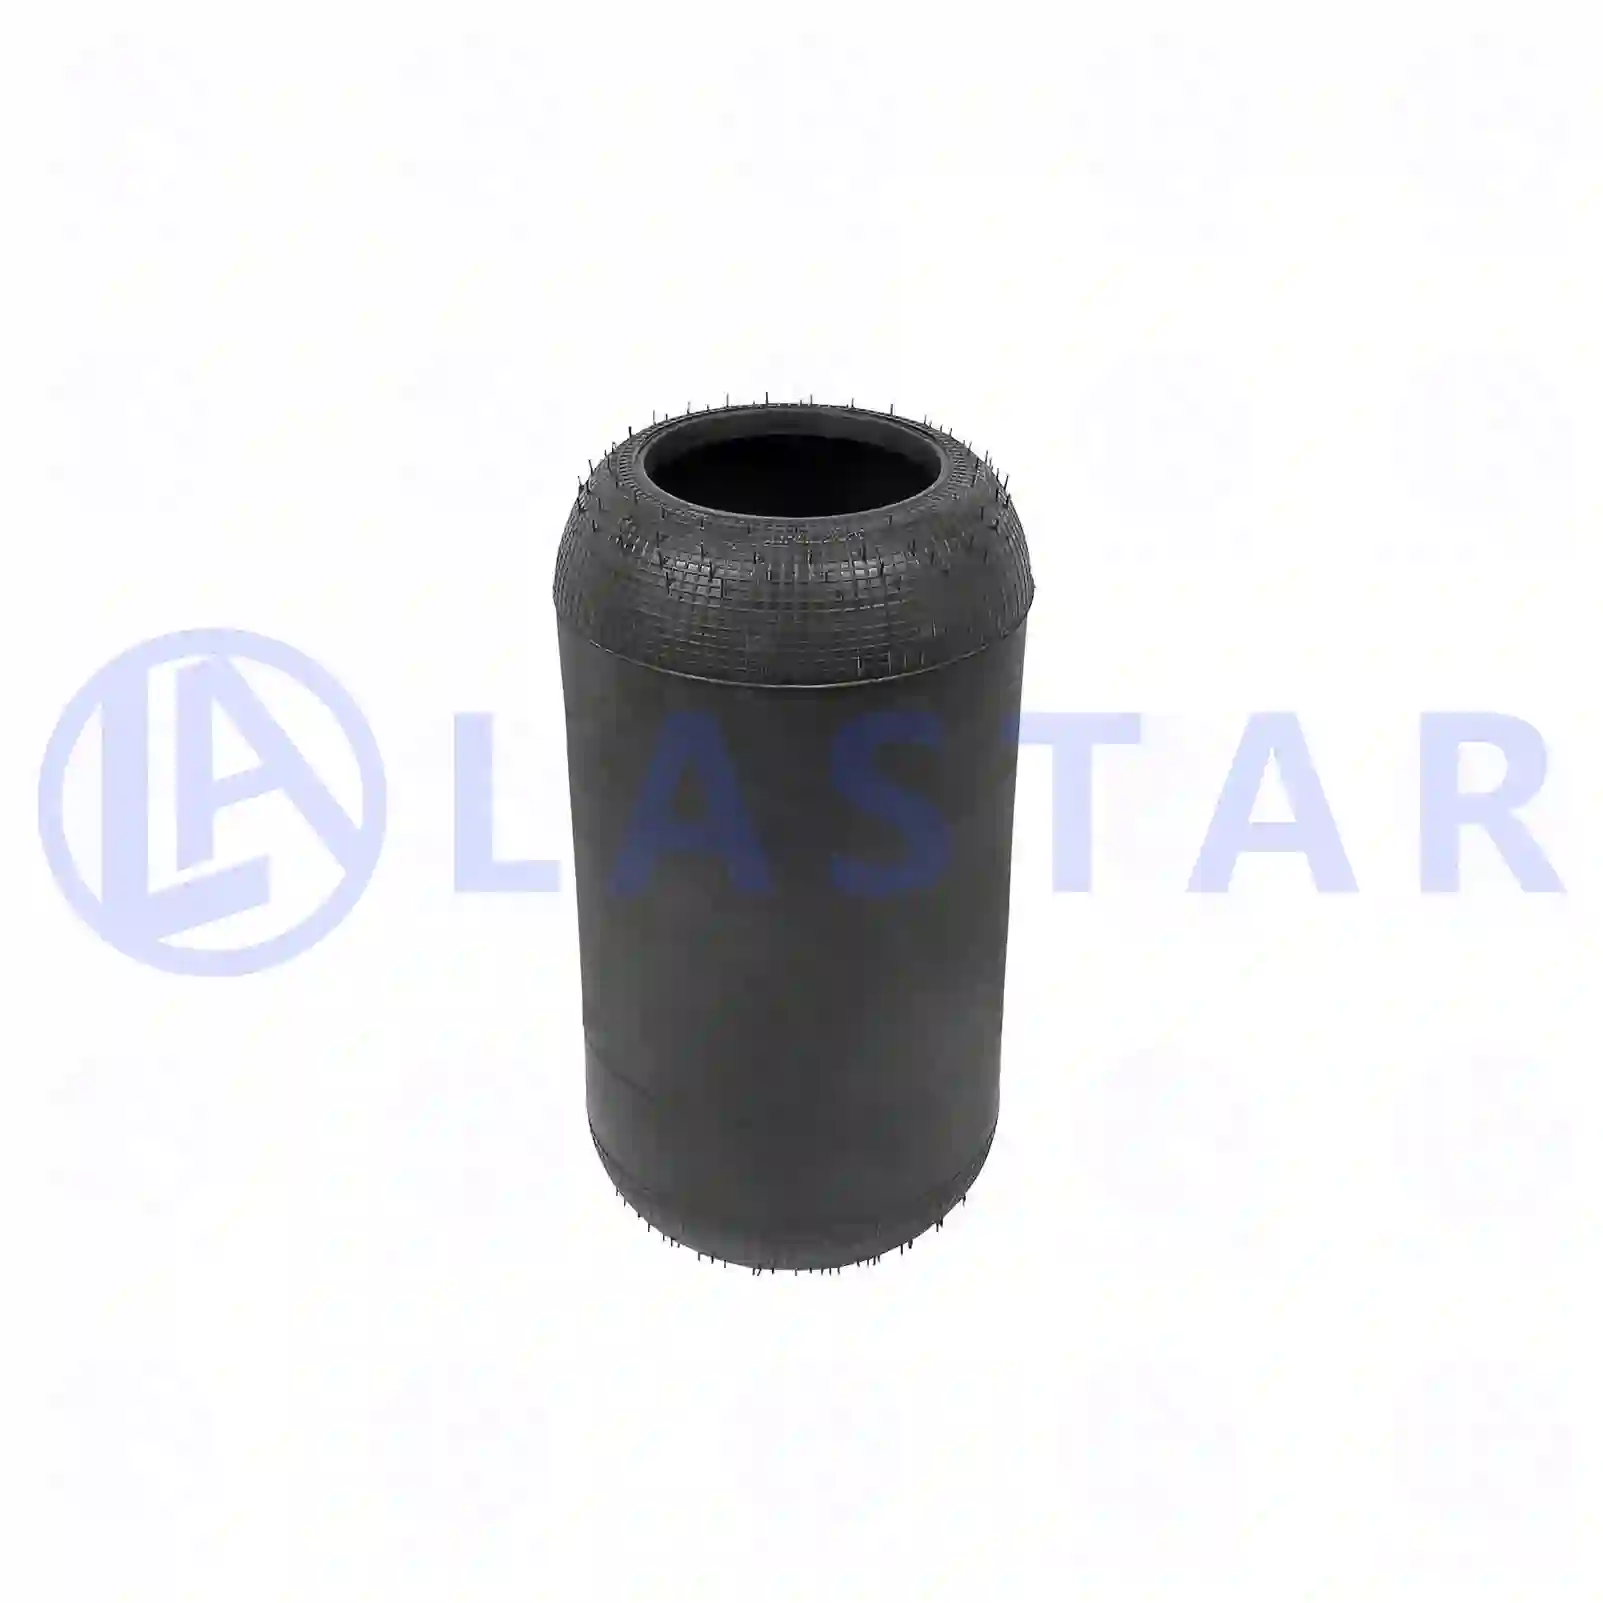 Air spring, without piston, 77729666, 20540789, ZG40818-0008, ||  77729666 Lastar Spare Part | Truck Spare Parts, Auotomotive Spare Parts Air spring, without piston, 77729666, 20540789, ZG40818-0008, ||  77729666 Lastar Spare Part | Truck Spare Parts, Auotomotive Spare Parts